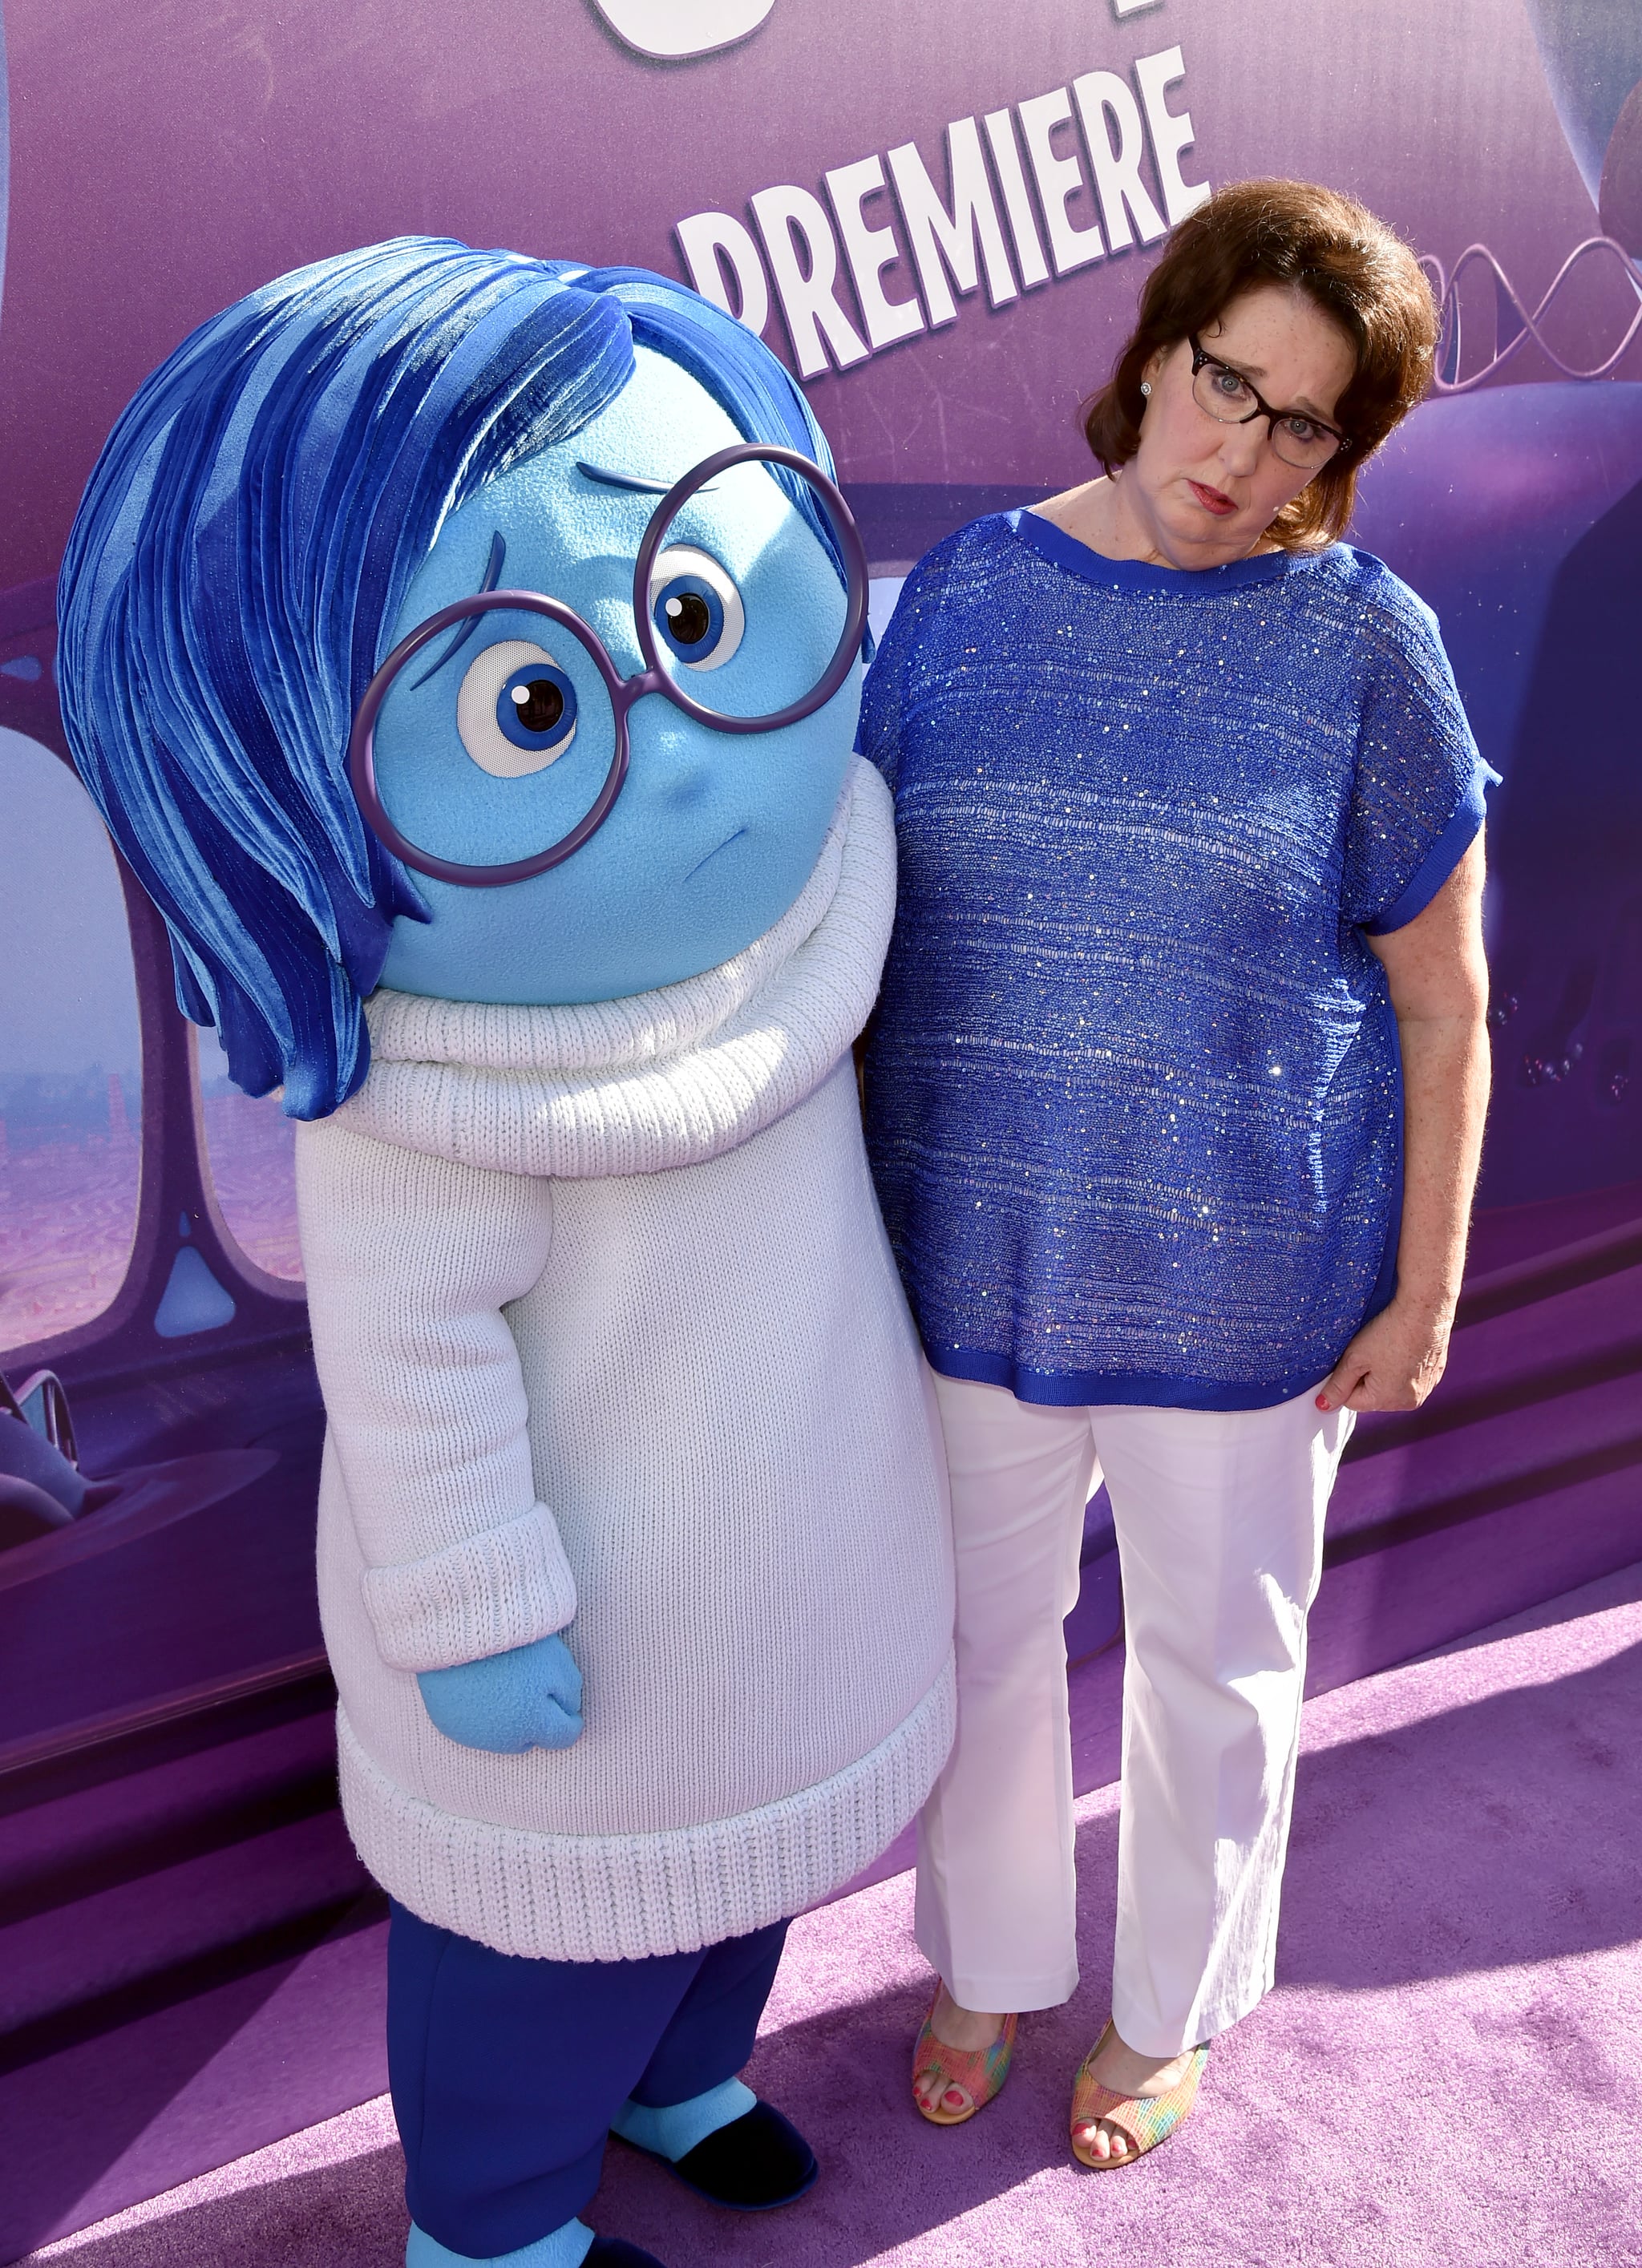 inside out premiere